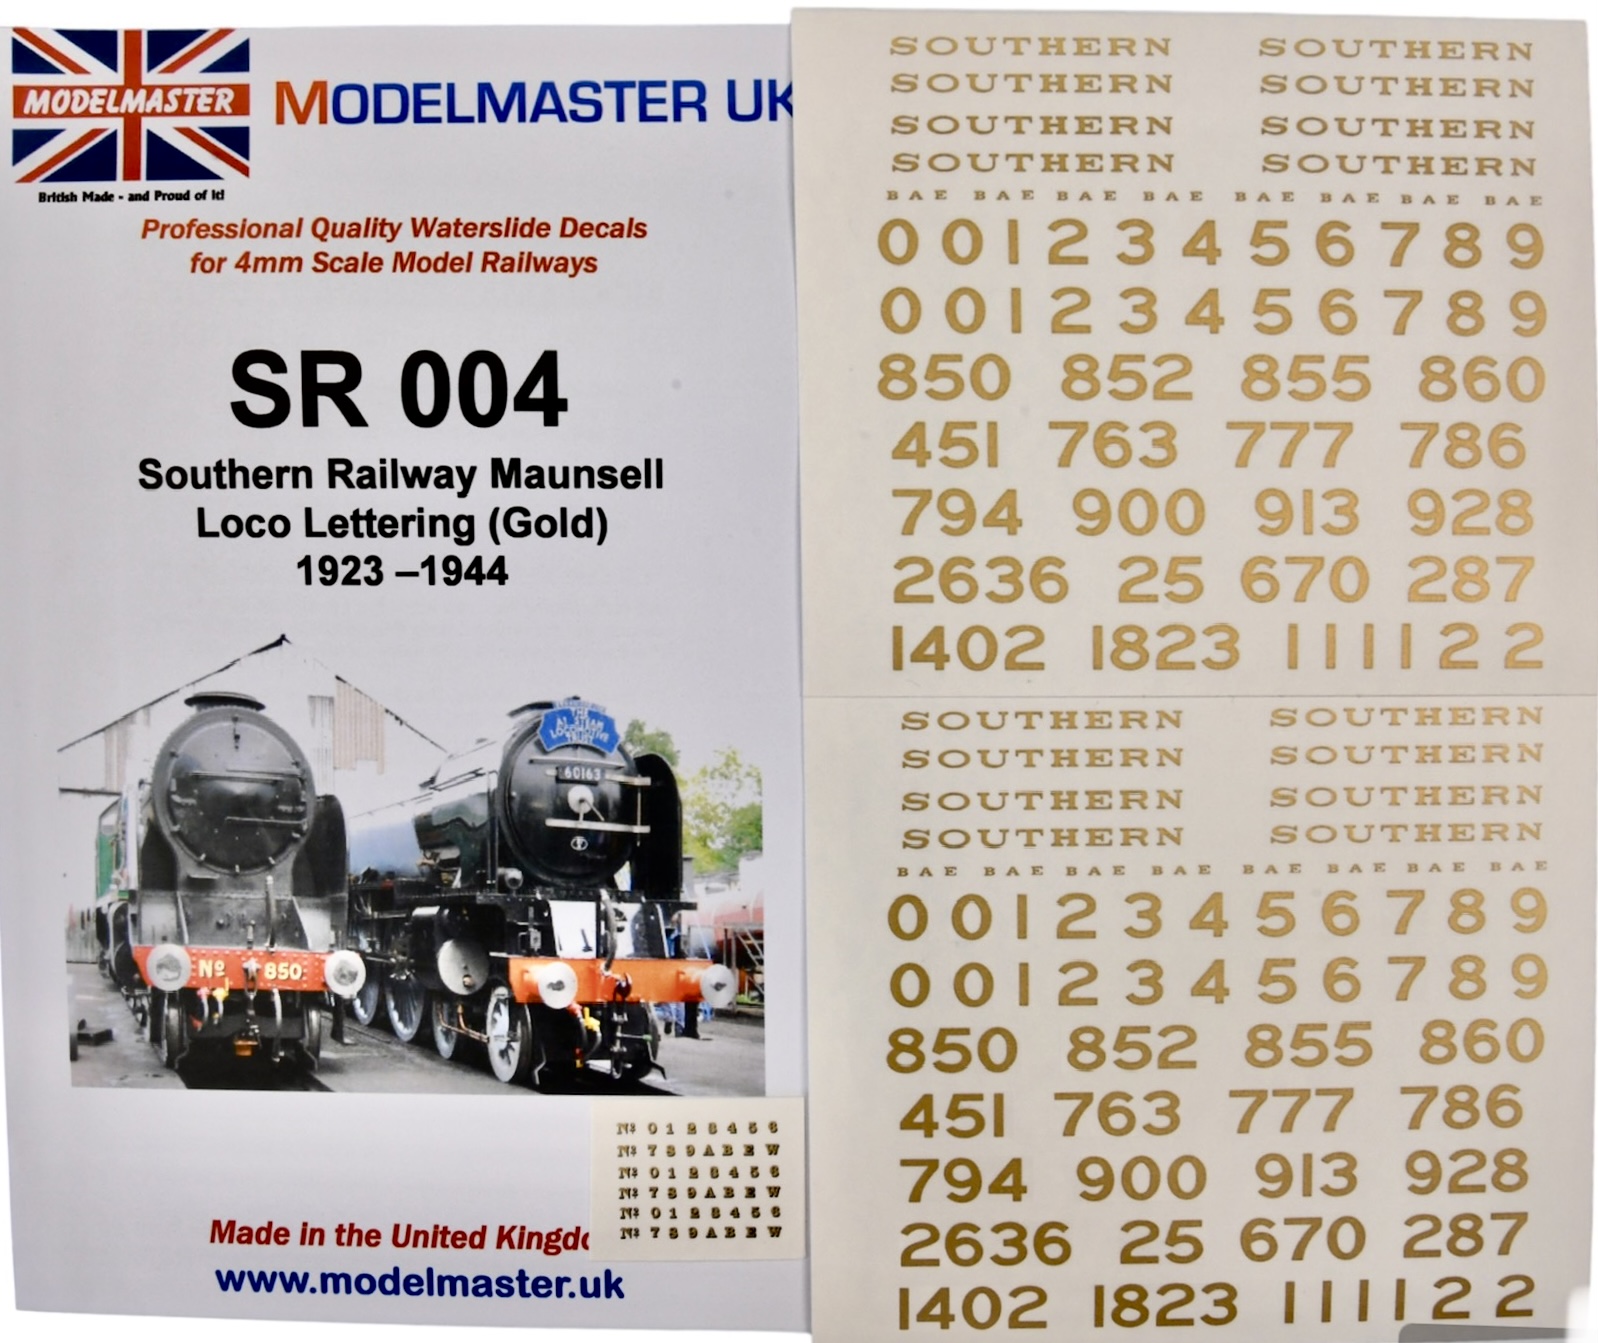 MMSR004 Southern Railway Maunsell Loco lettering & Numbering, GOLD